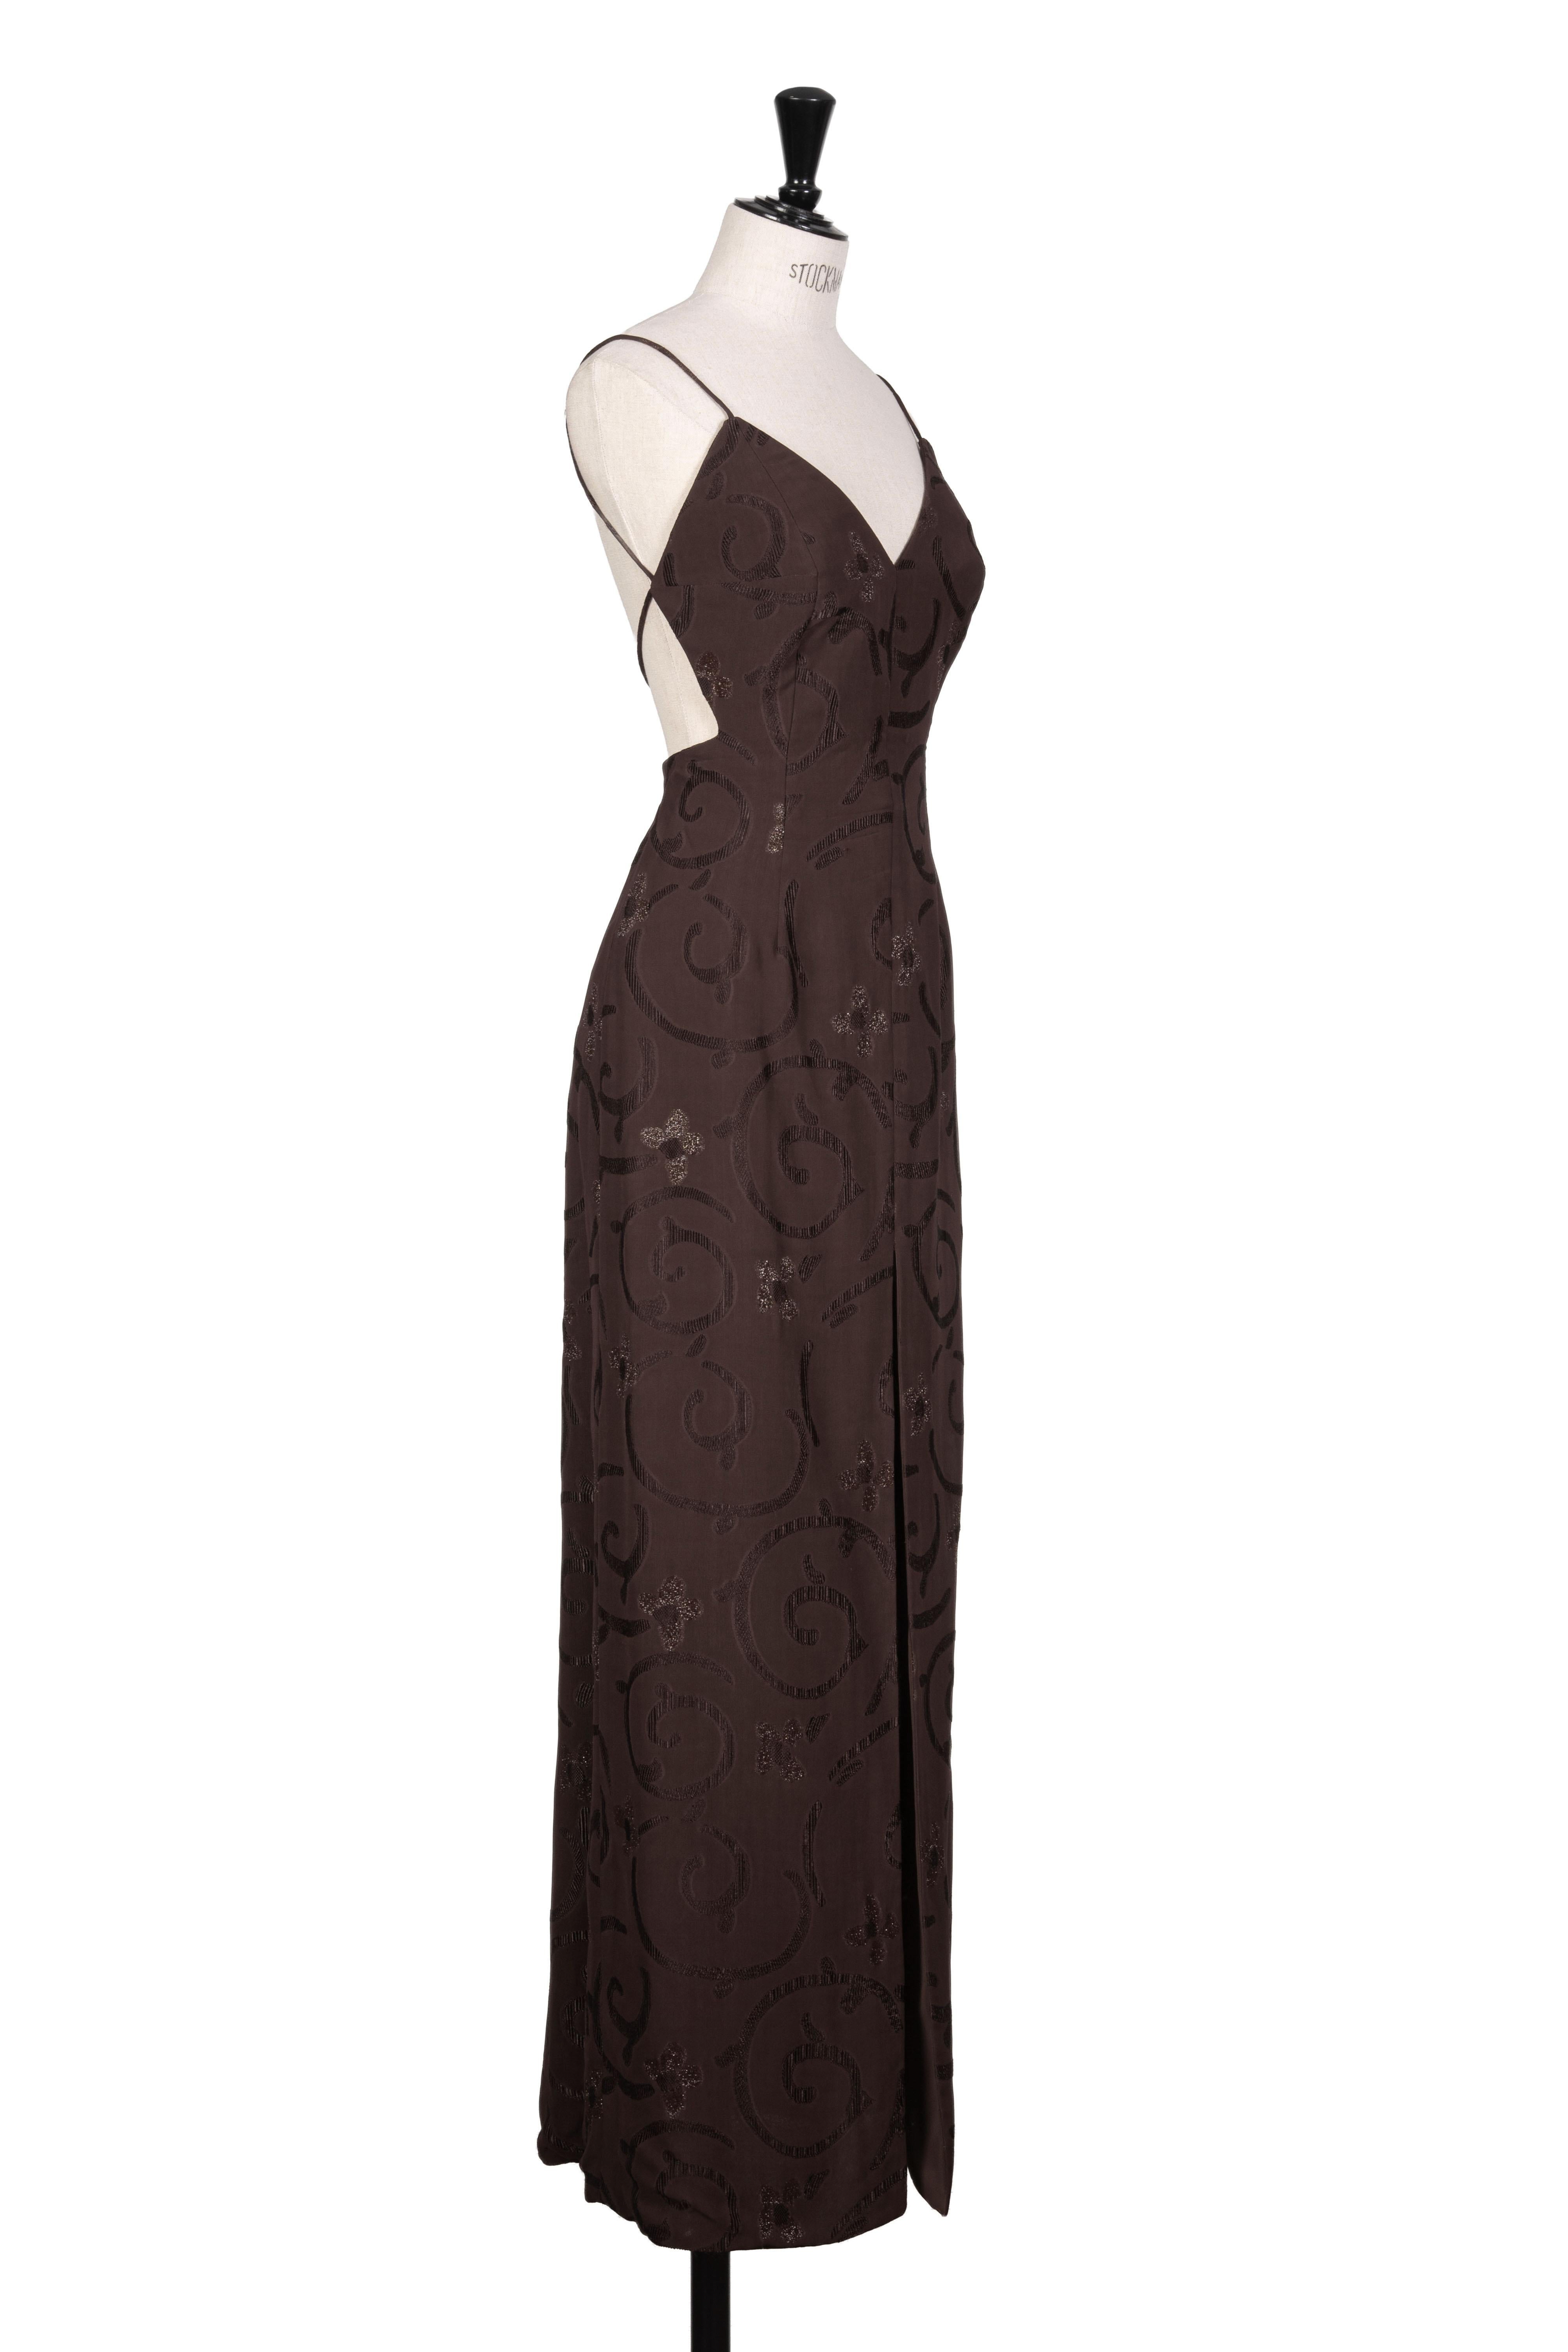 Spring 1997 GIORGIO ARMANI Runway & Ad Campaign Brown Backless Maxi Dress For Sale 1